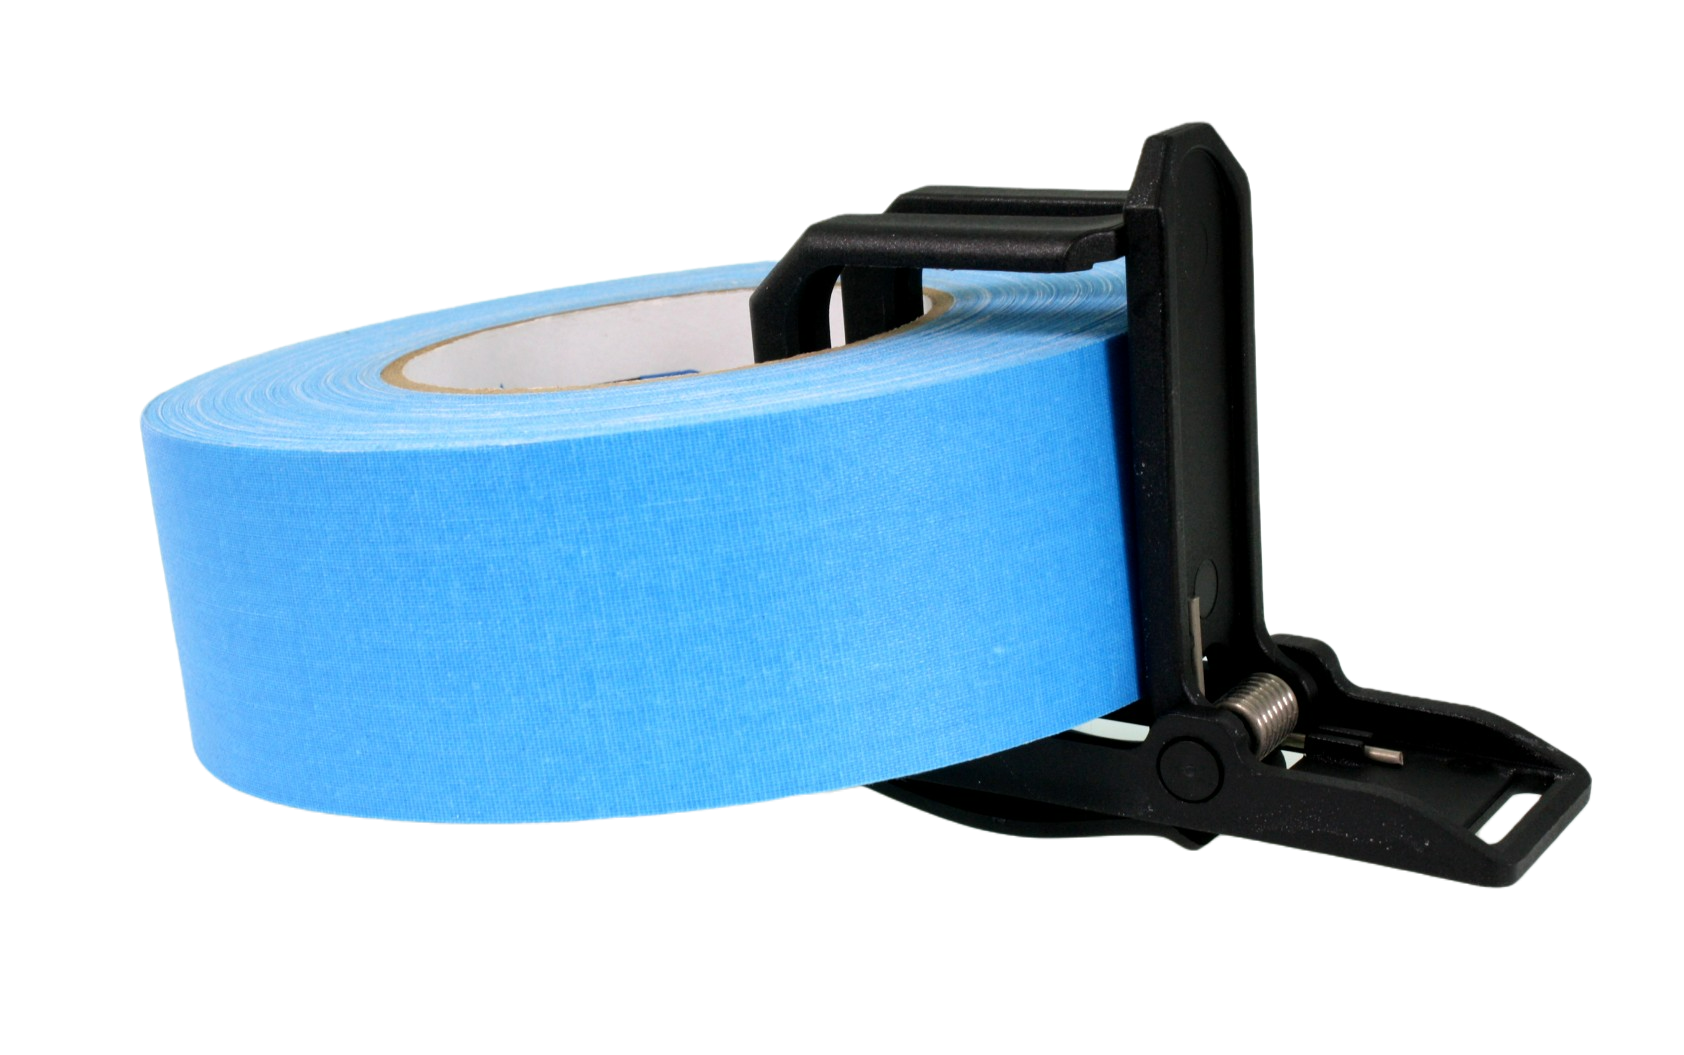 Tough Gaff 2" holding a roll of 2" Pro Gaff fluro blue tape